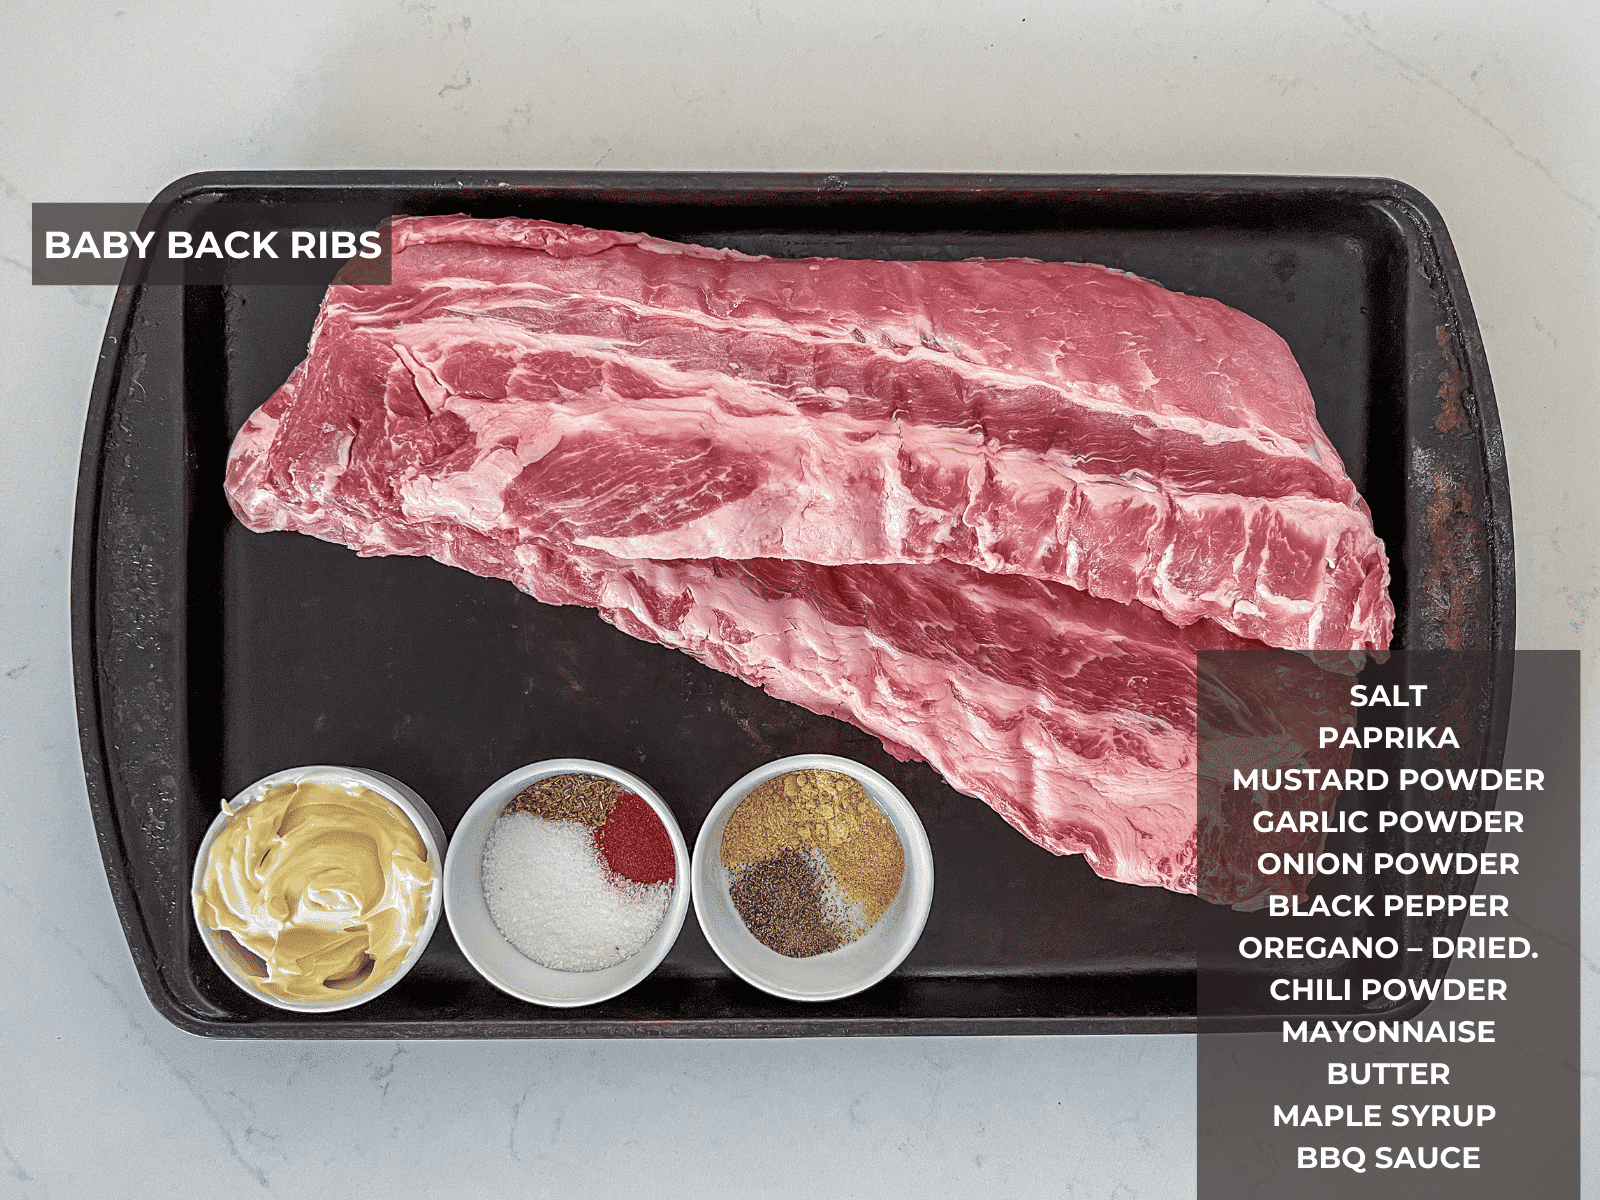 ingredients for baby back ribs set out on a baking sheet